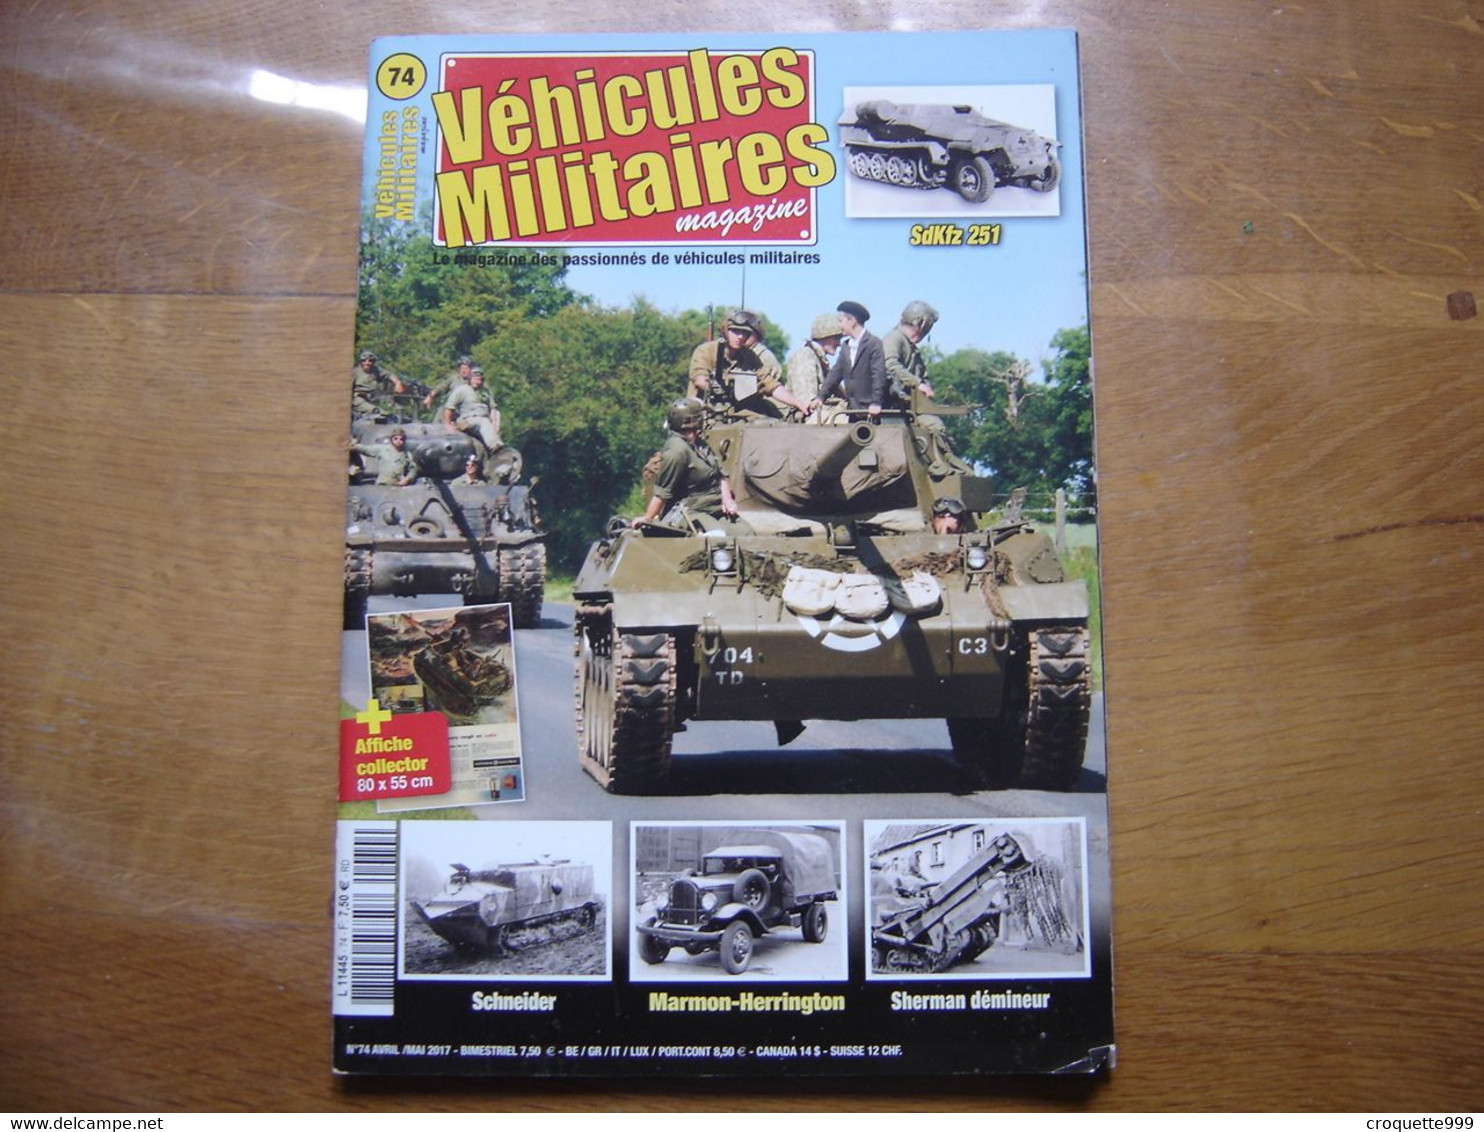 VEHICULES MILITAIRES MAGAZINE 74 Materiel Armee Sommaire En Photo AFFICHE POSTER - Weapons